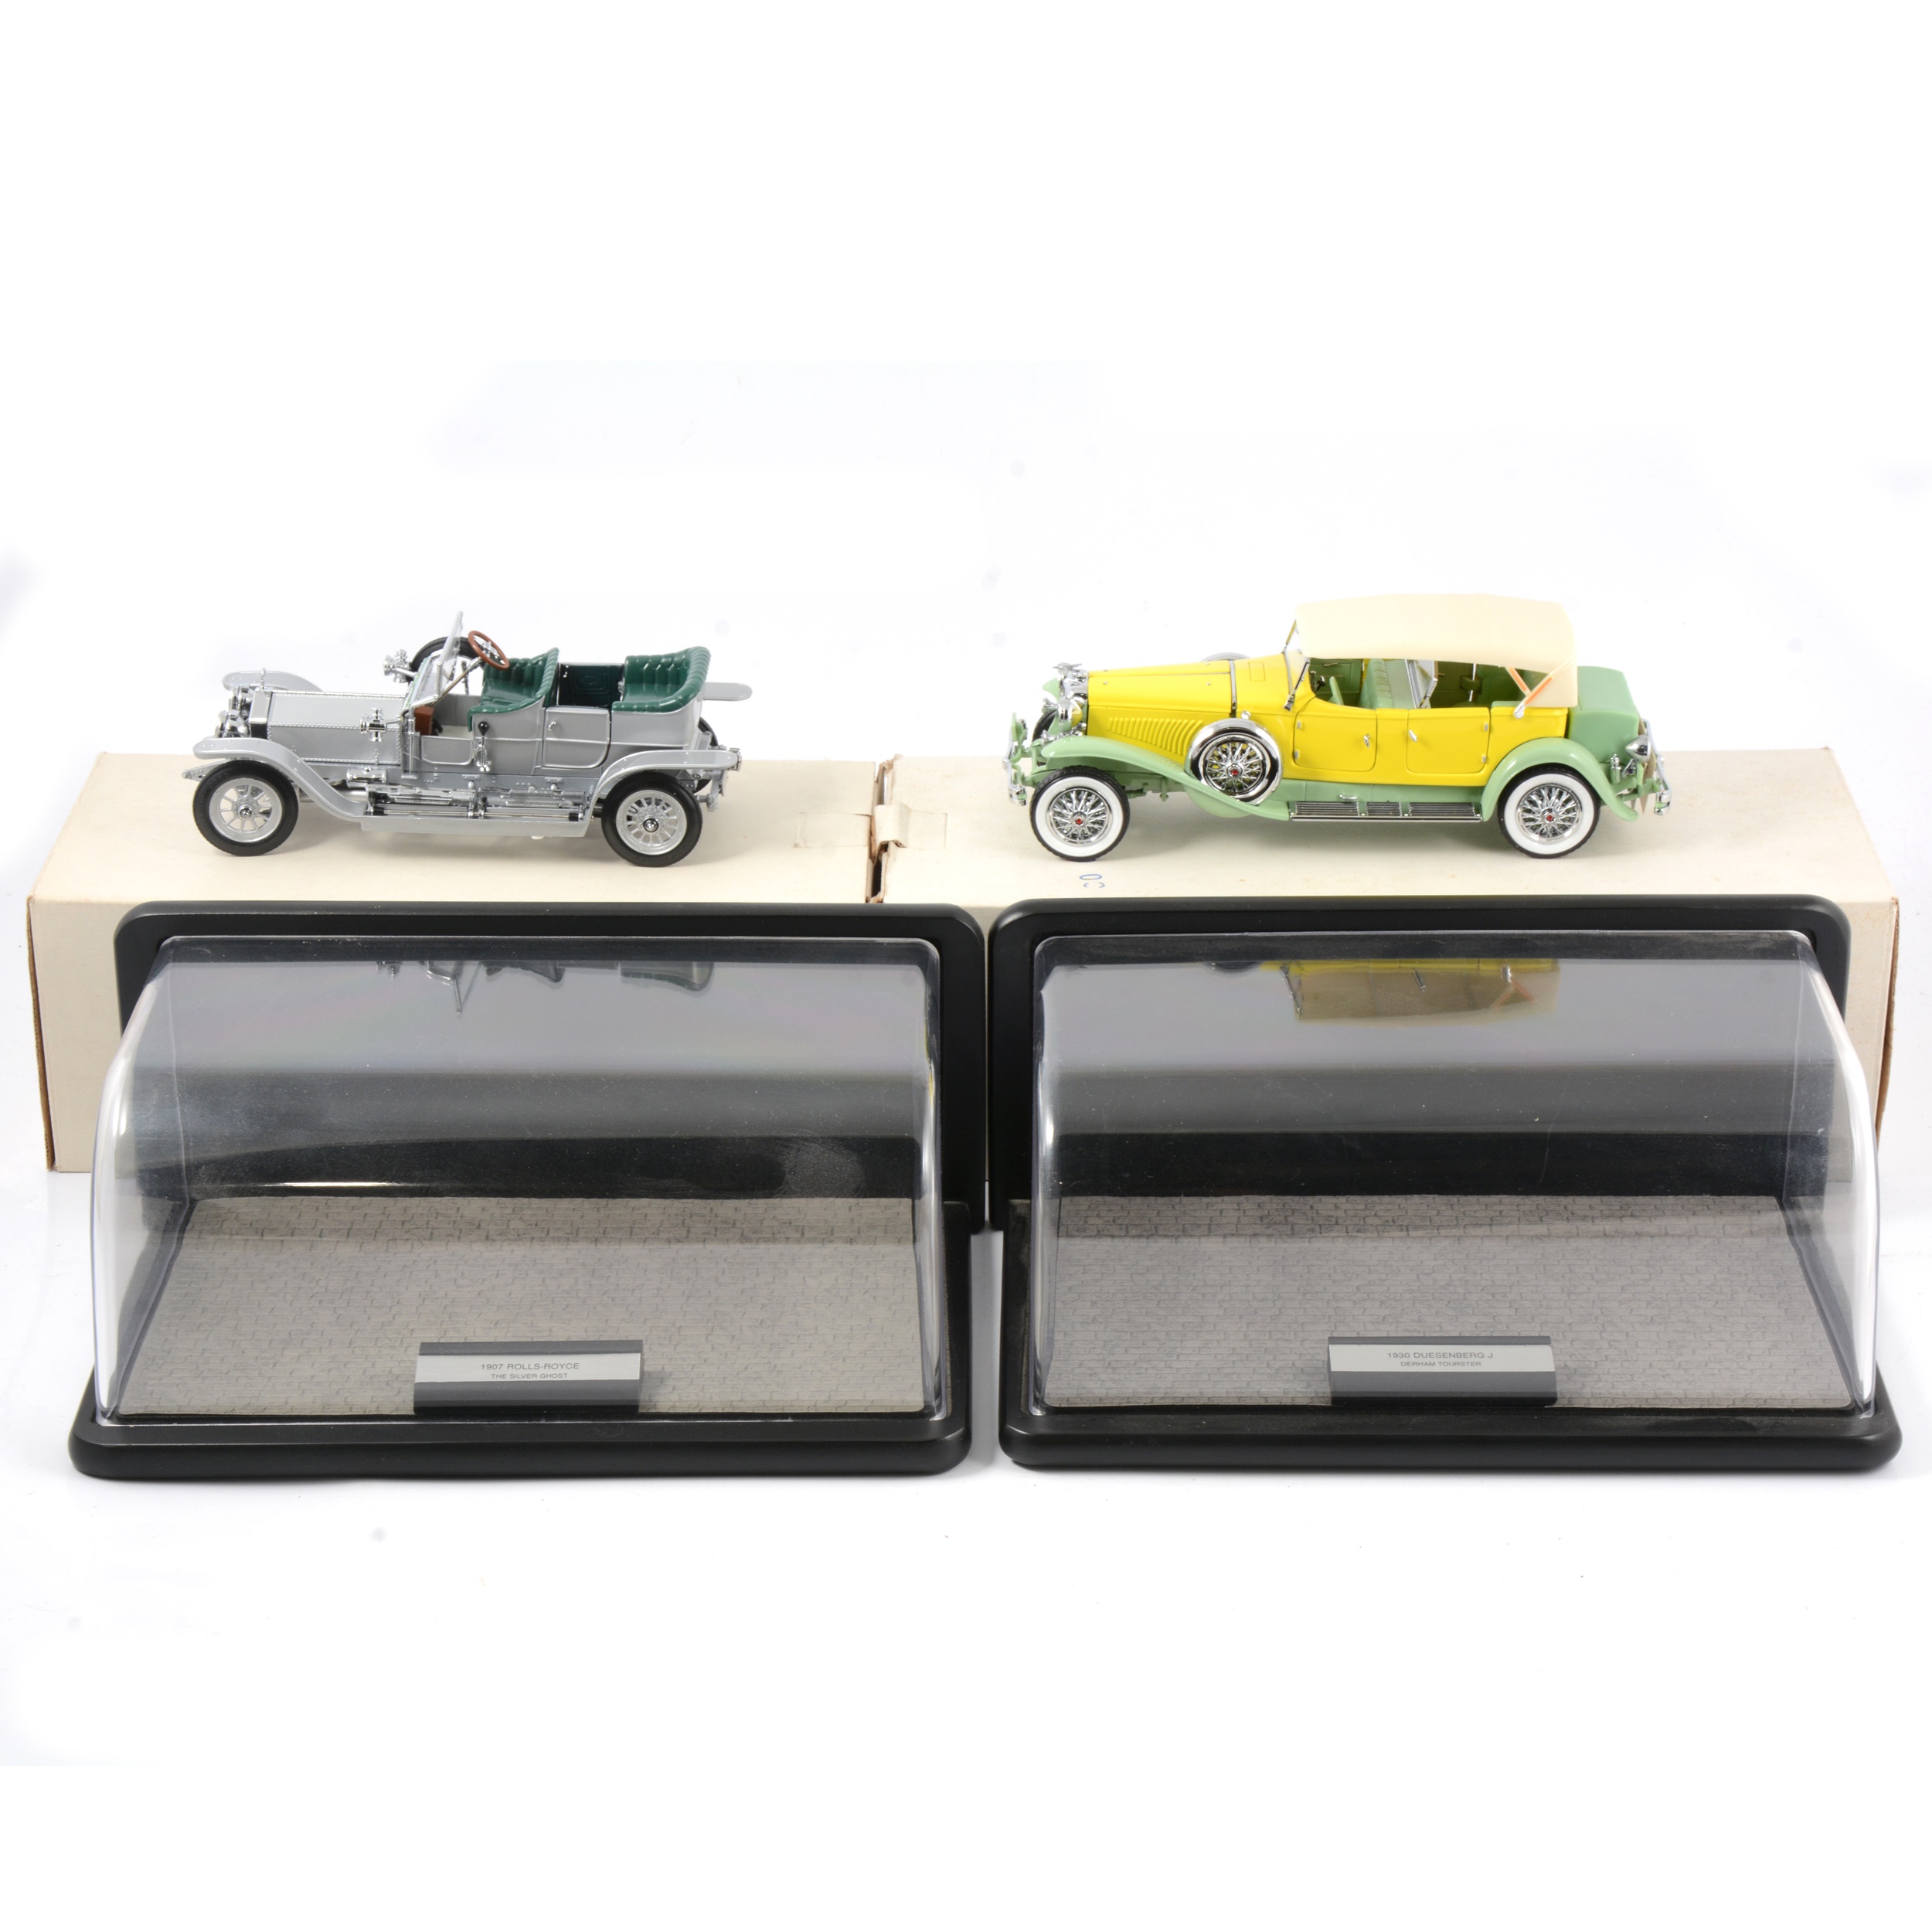 Franklin Mint 1:24 scale models, Rolls Royce The Silver Ghost and Dusenberg J